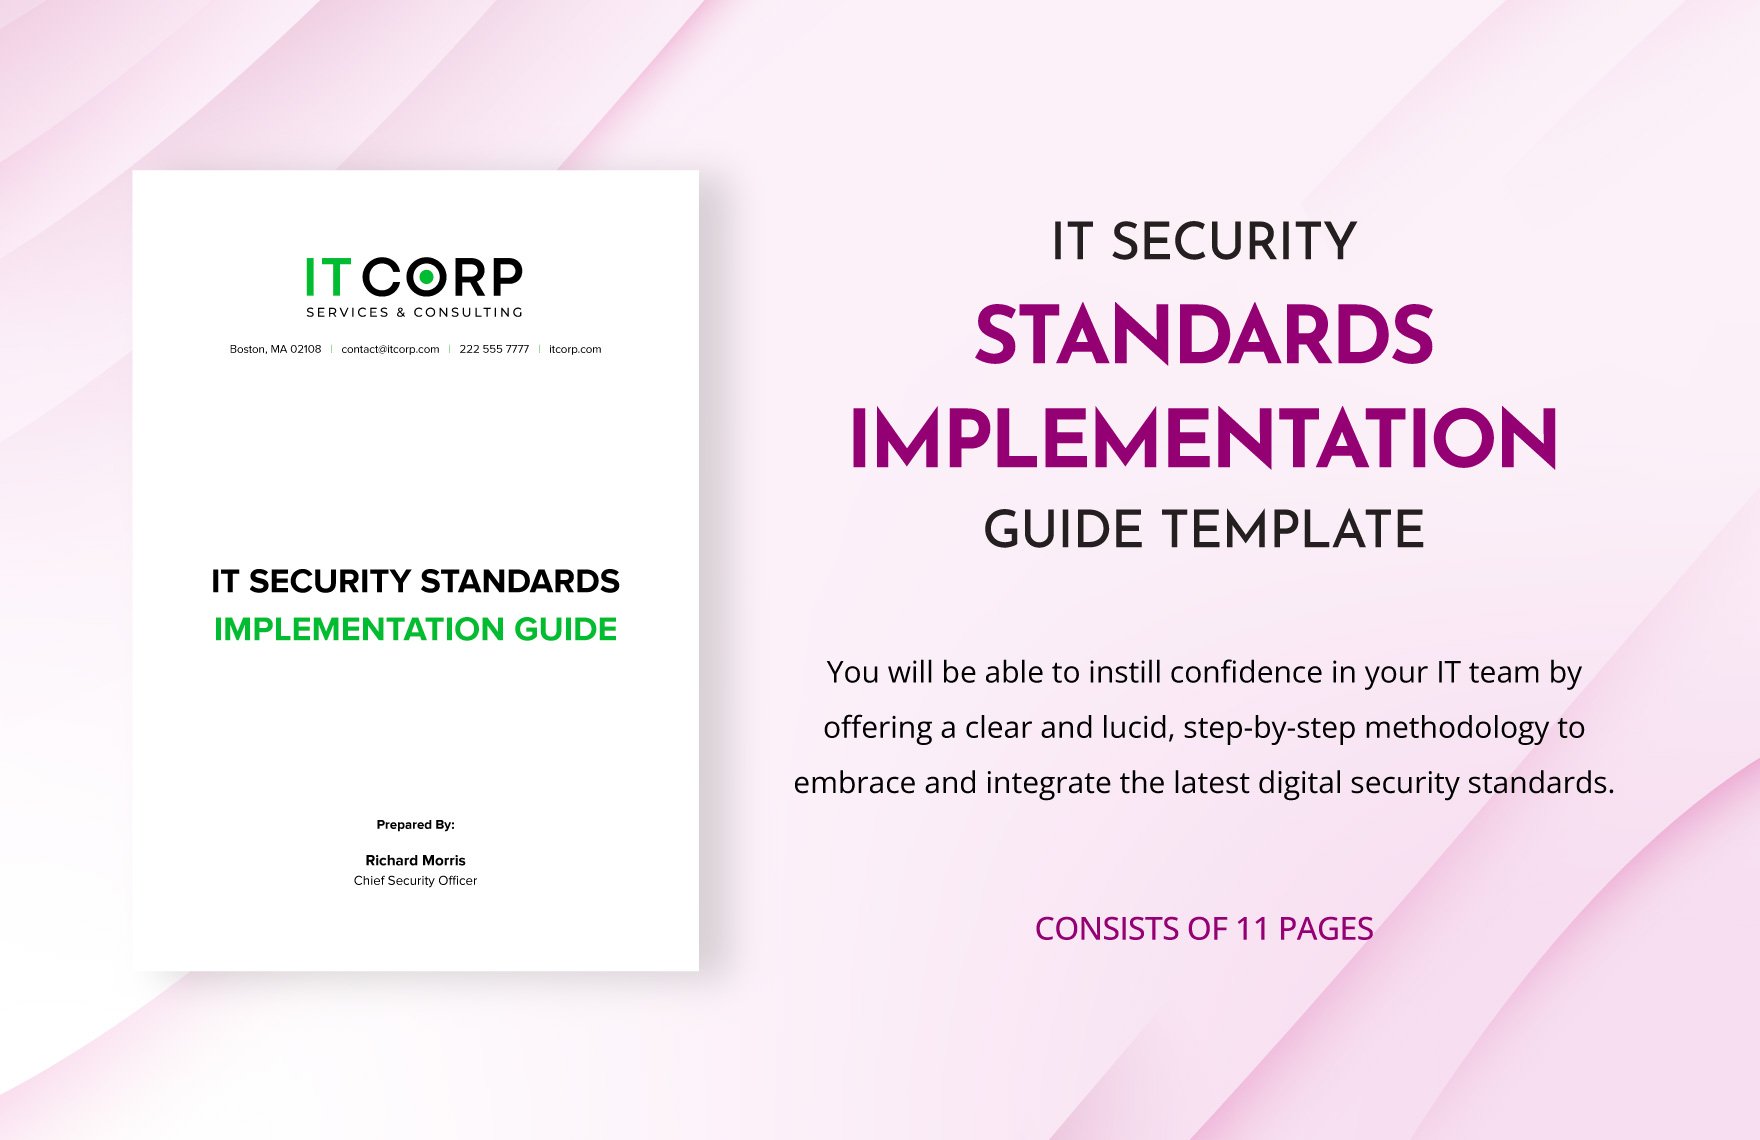 IT Security Standards Implementation Guide Template